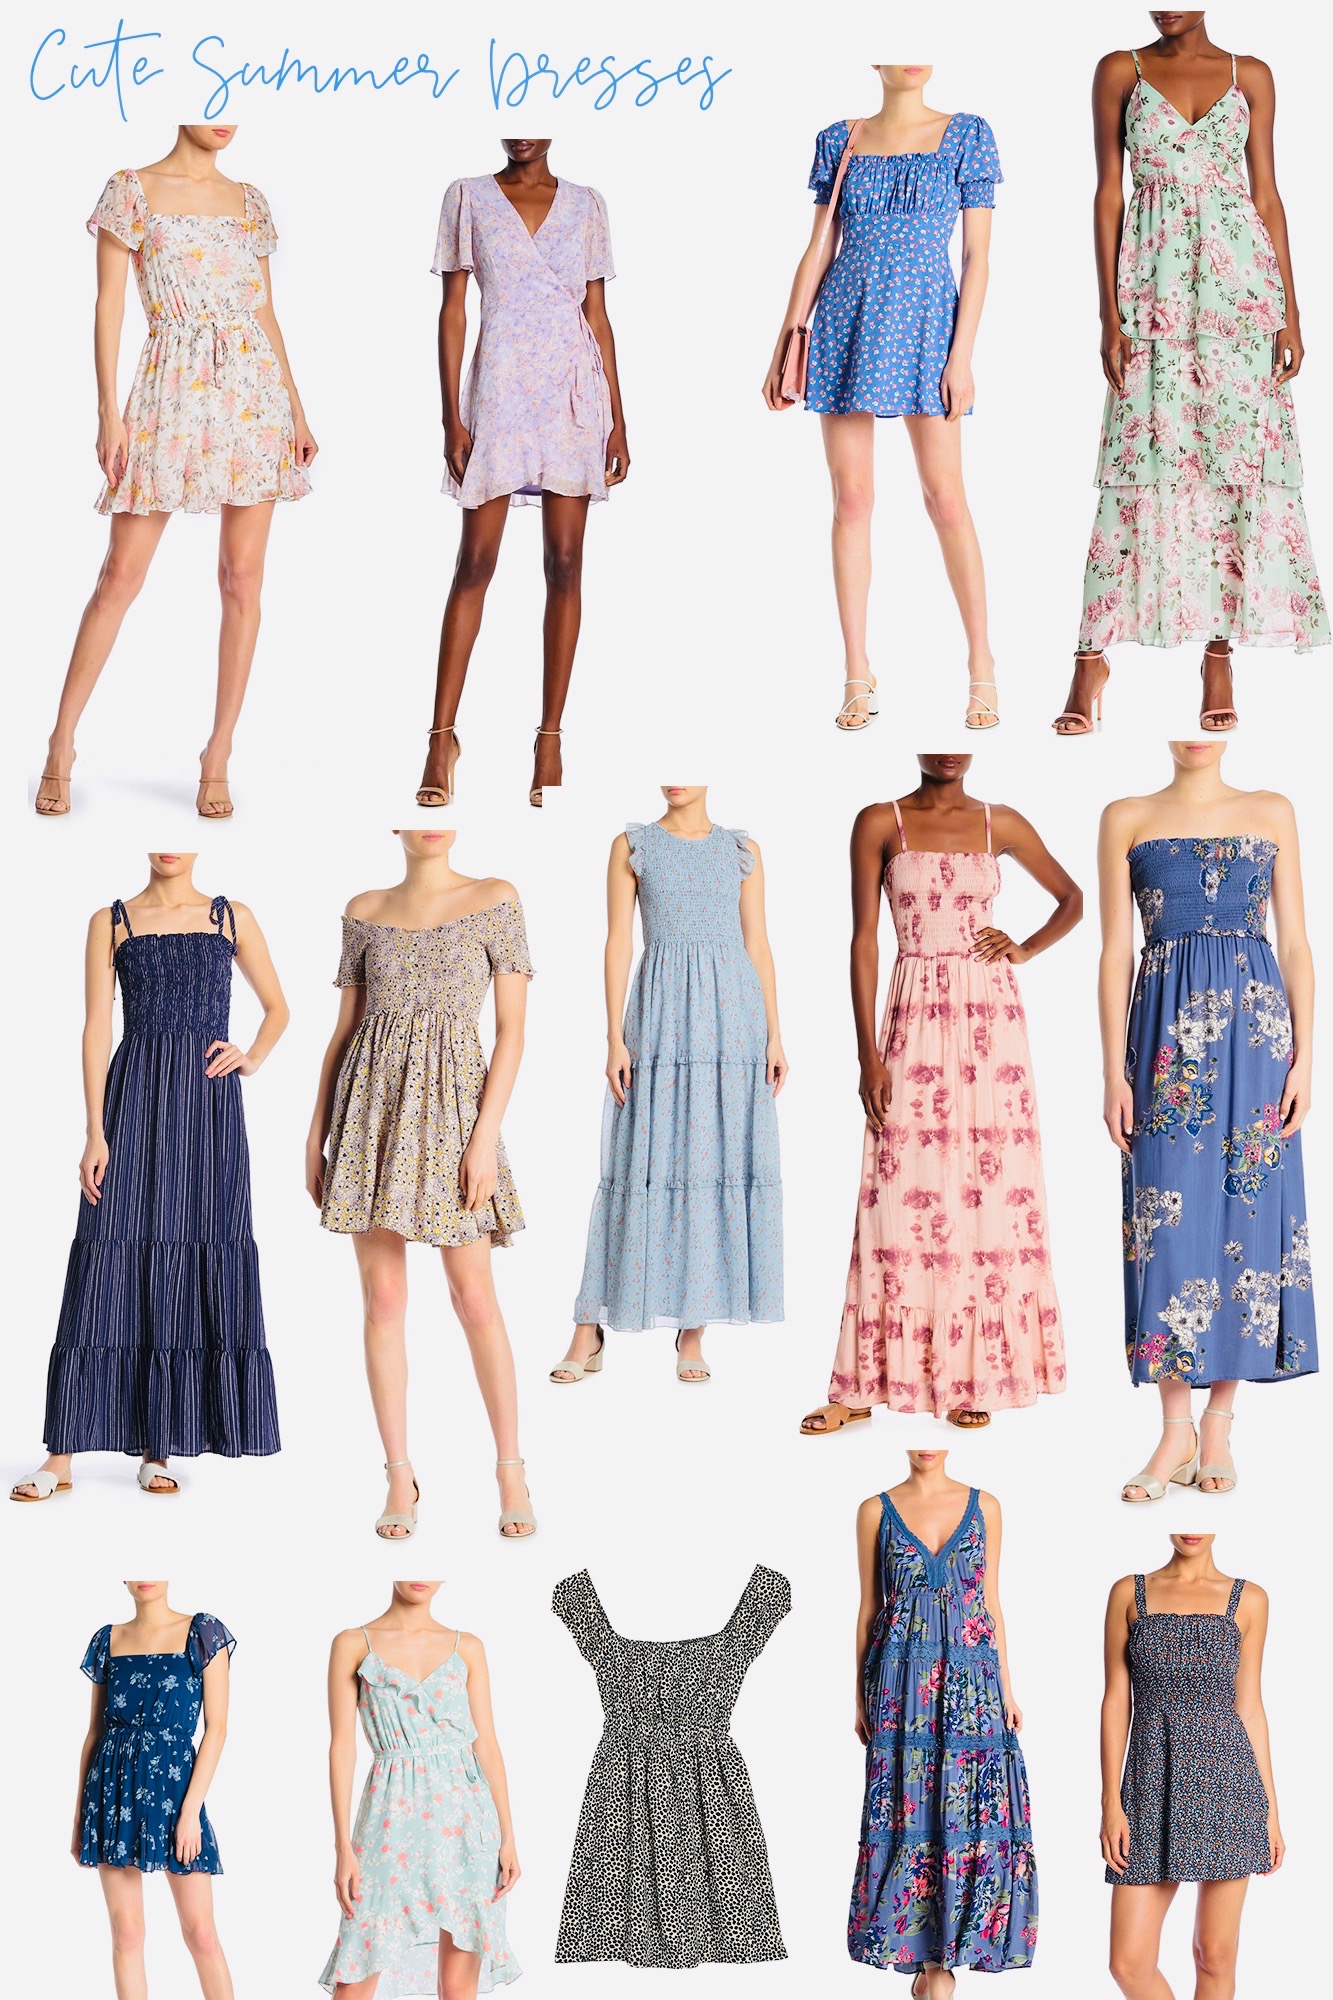 Affordable Summer Dresses I Love - All under $40-50! So many great styles that are chic, classy and fun for low price options. 